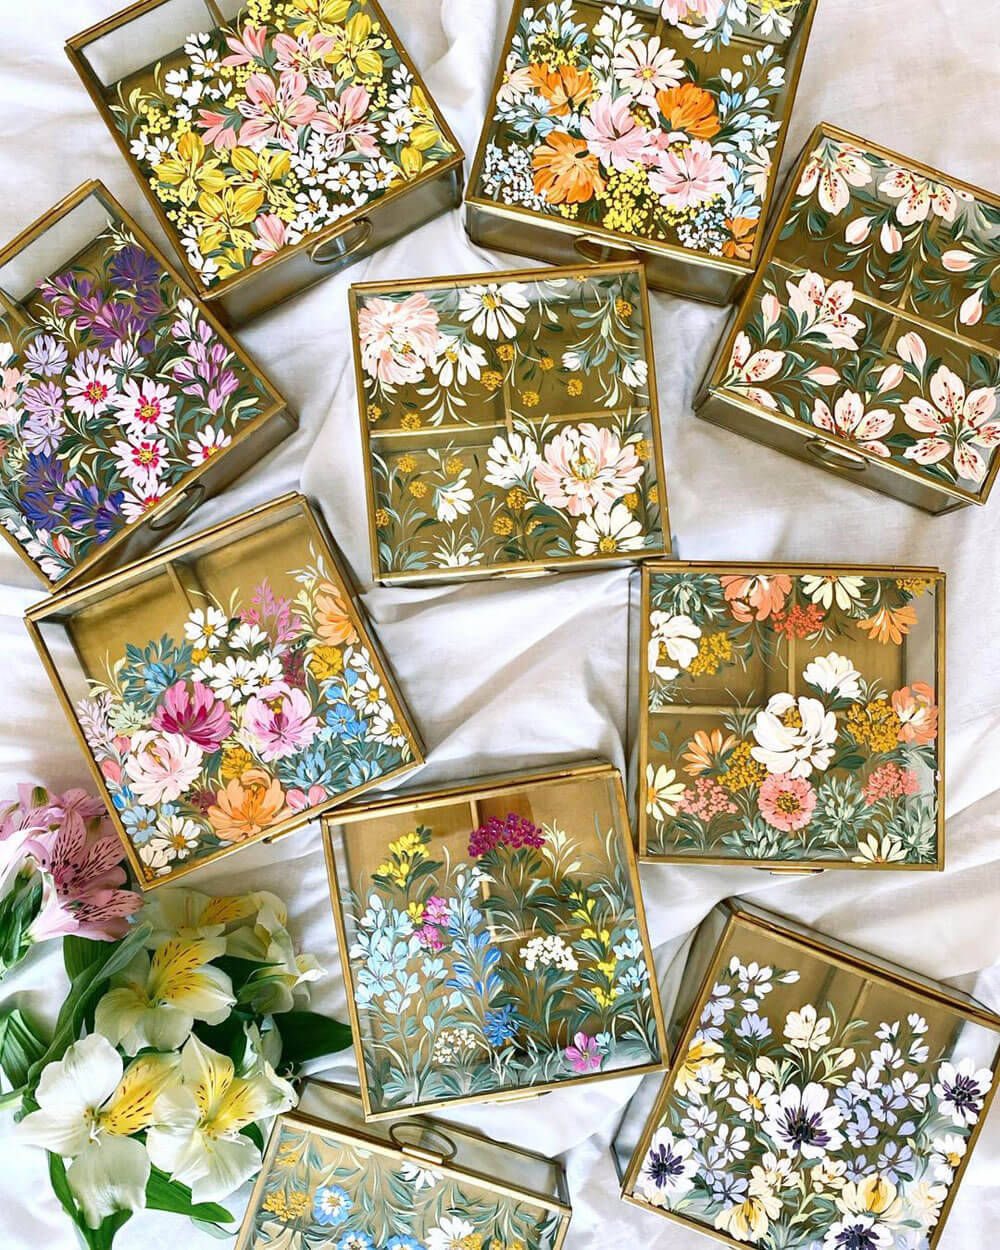 floral painted jewelry boxes by lucy siviter